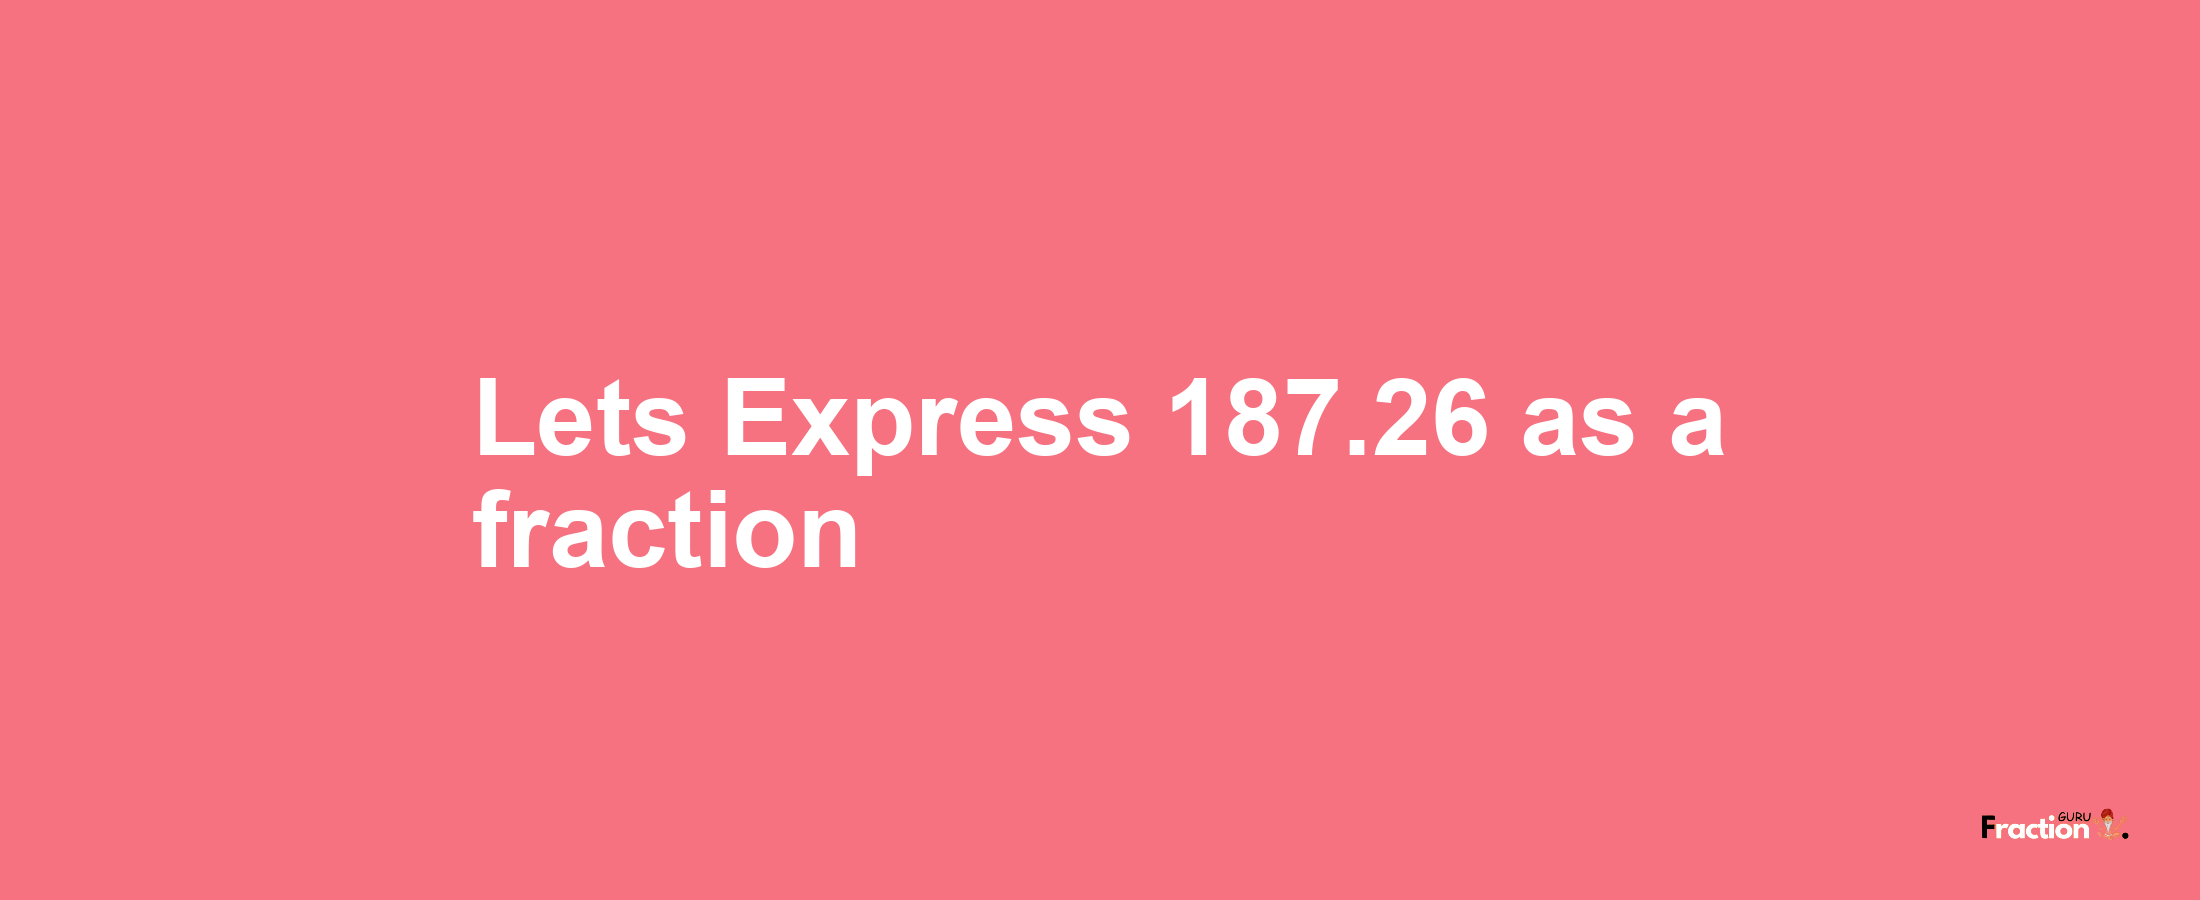 Lets Express 187.26 as afraction